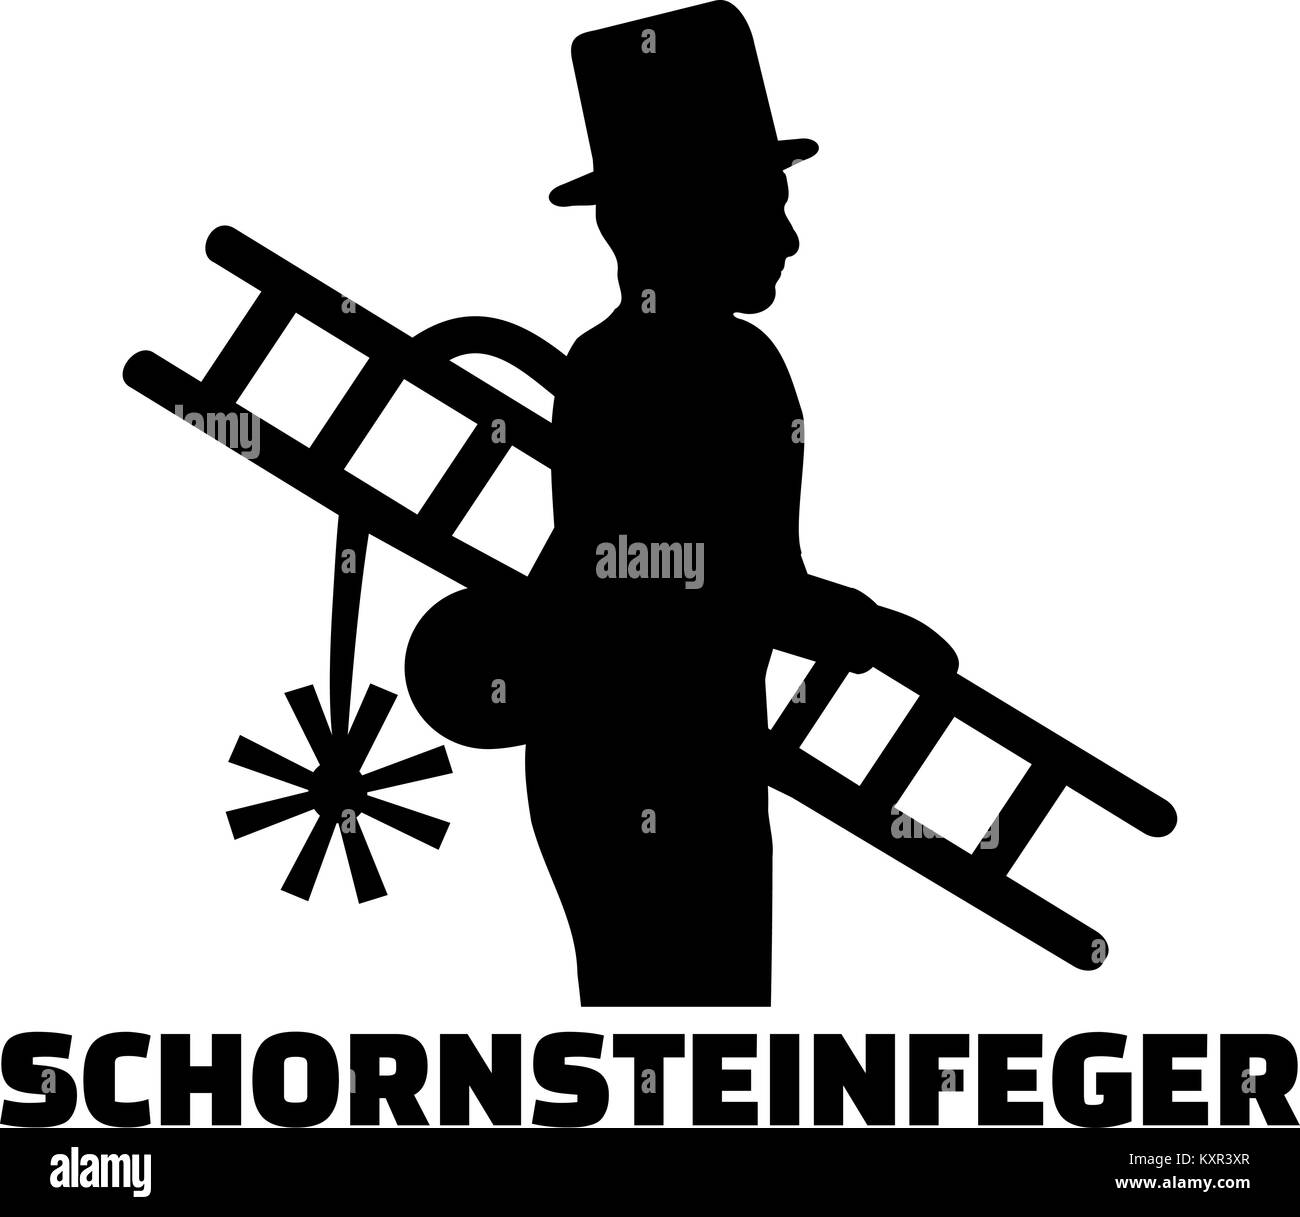 Chimney sweeper with german job title Stock Vector